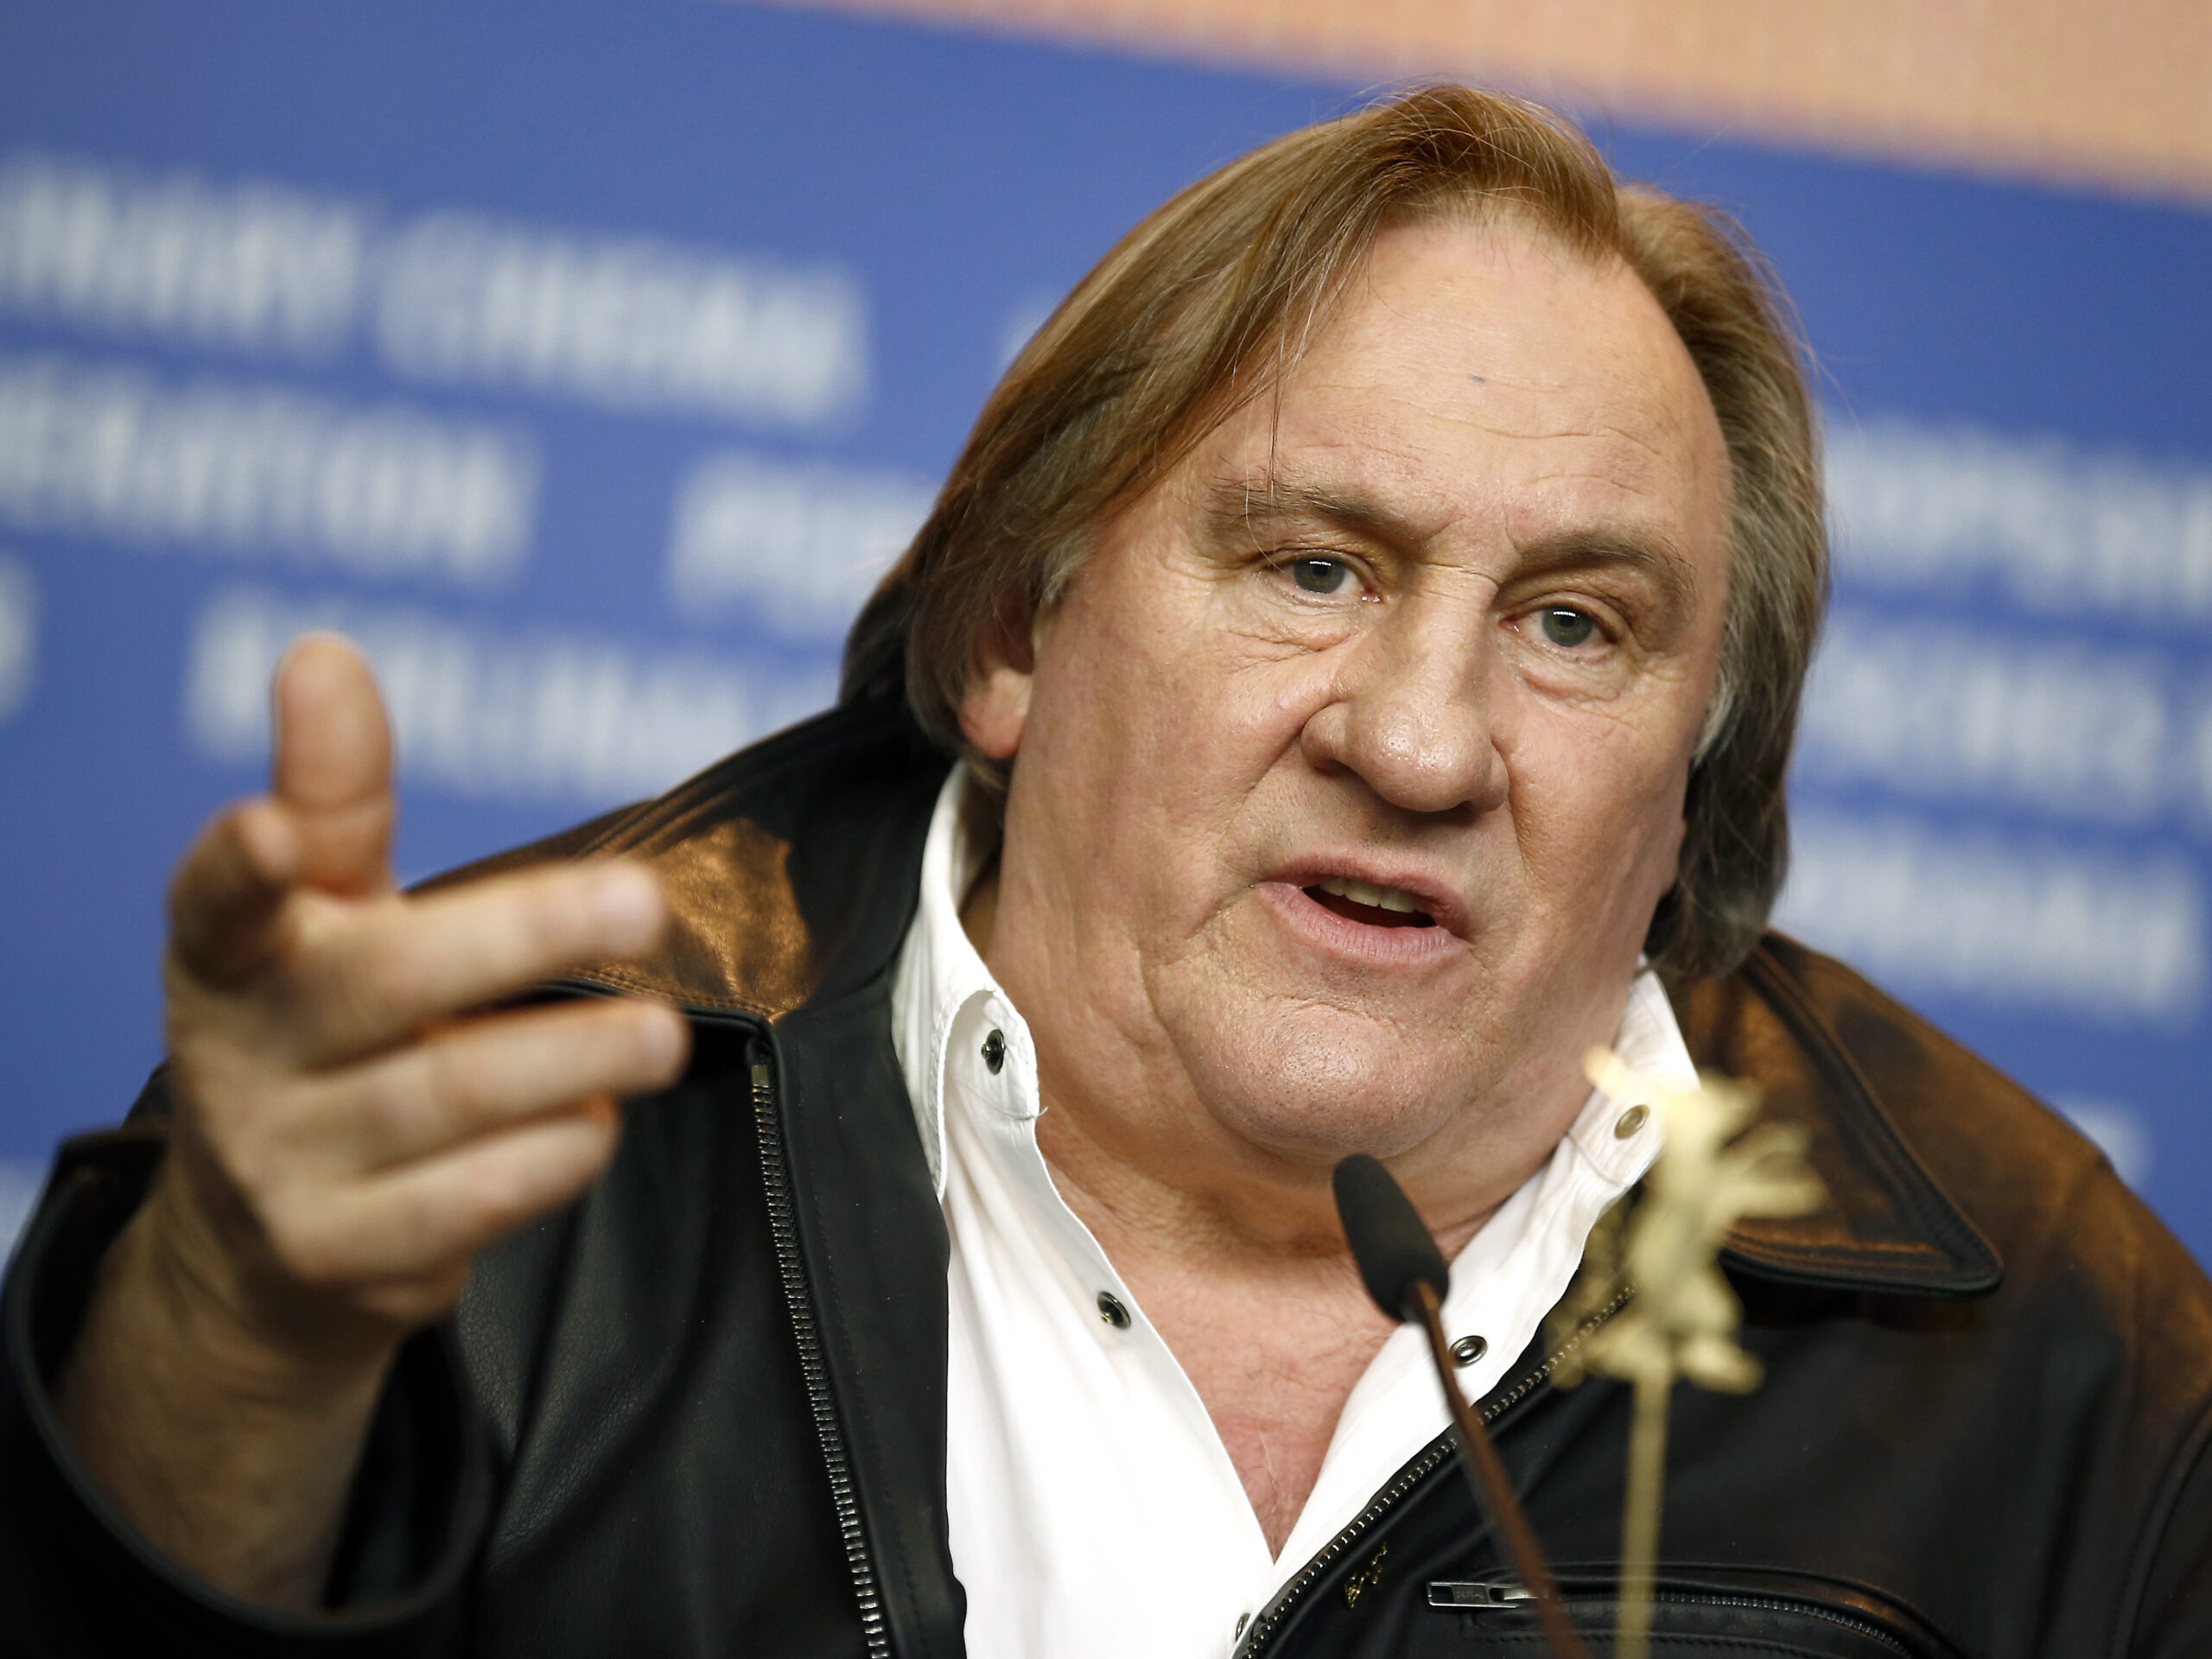 Actor Gerard Depardieu addresses the media during the press conference for the film 'Saint Amour' at the 2016 Berlinale Film Festival in Berlin, Germany, Friday, Feb. 19, 2016.